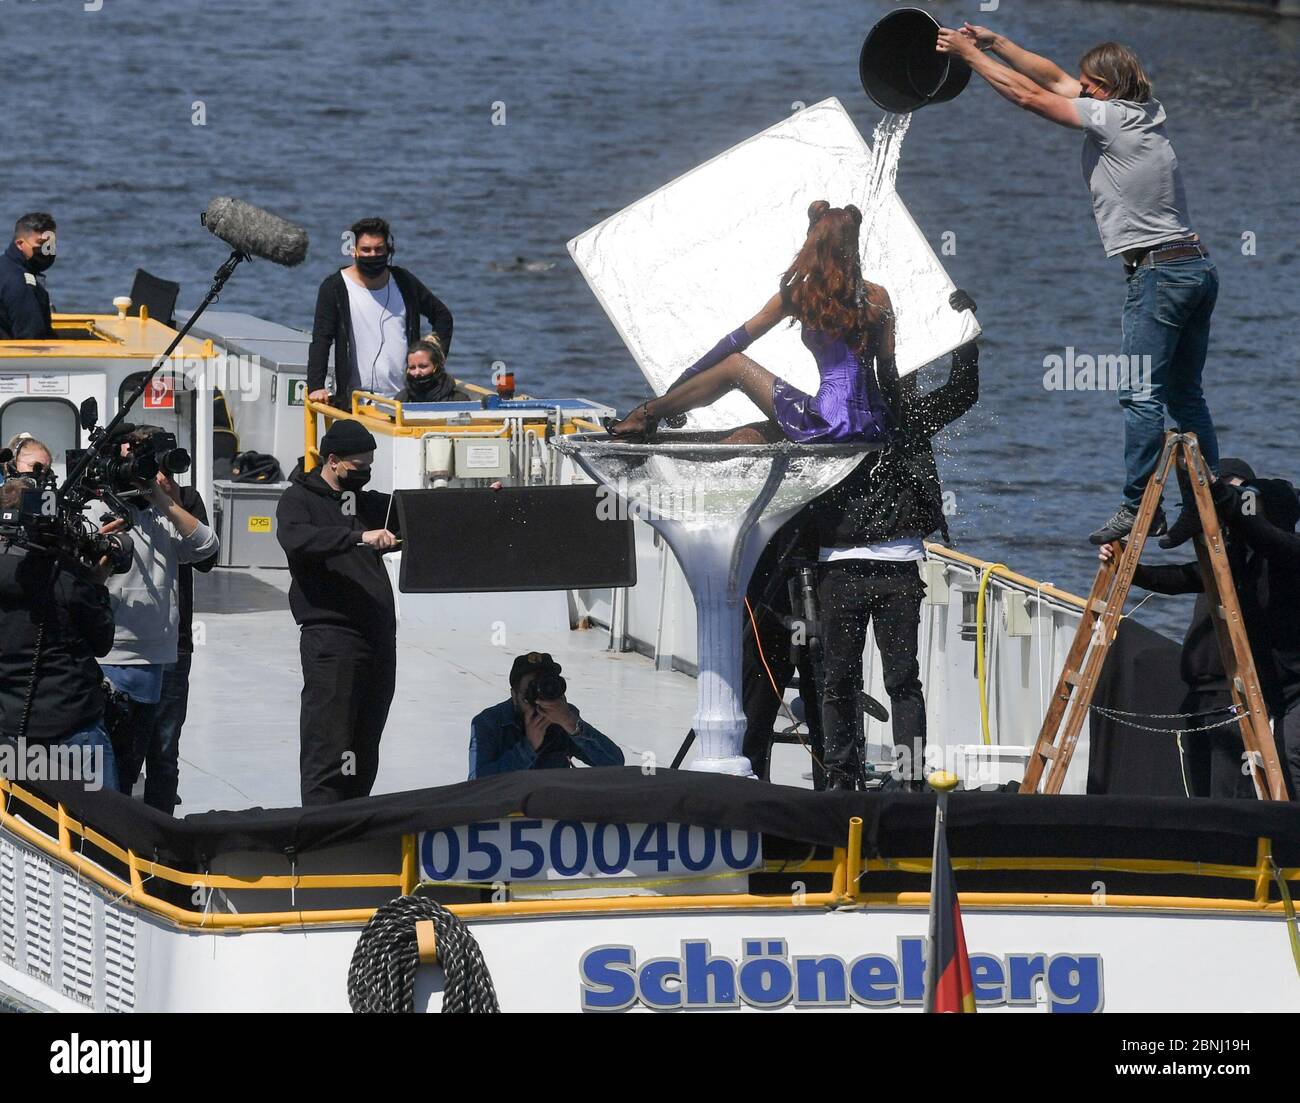 Berlin, Germany. 15th May, 2020. Jacky, finalist of the casting show Germany's Next Topmodel, poses on a boat on the Spree during shooting for the final show of the 15th season. The live finale of "GNTM" will take place on 21 May 2020. Credit: Jens Kalaene/dpa-Zentralbild/dpa/Alamy Live News Stock Photo